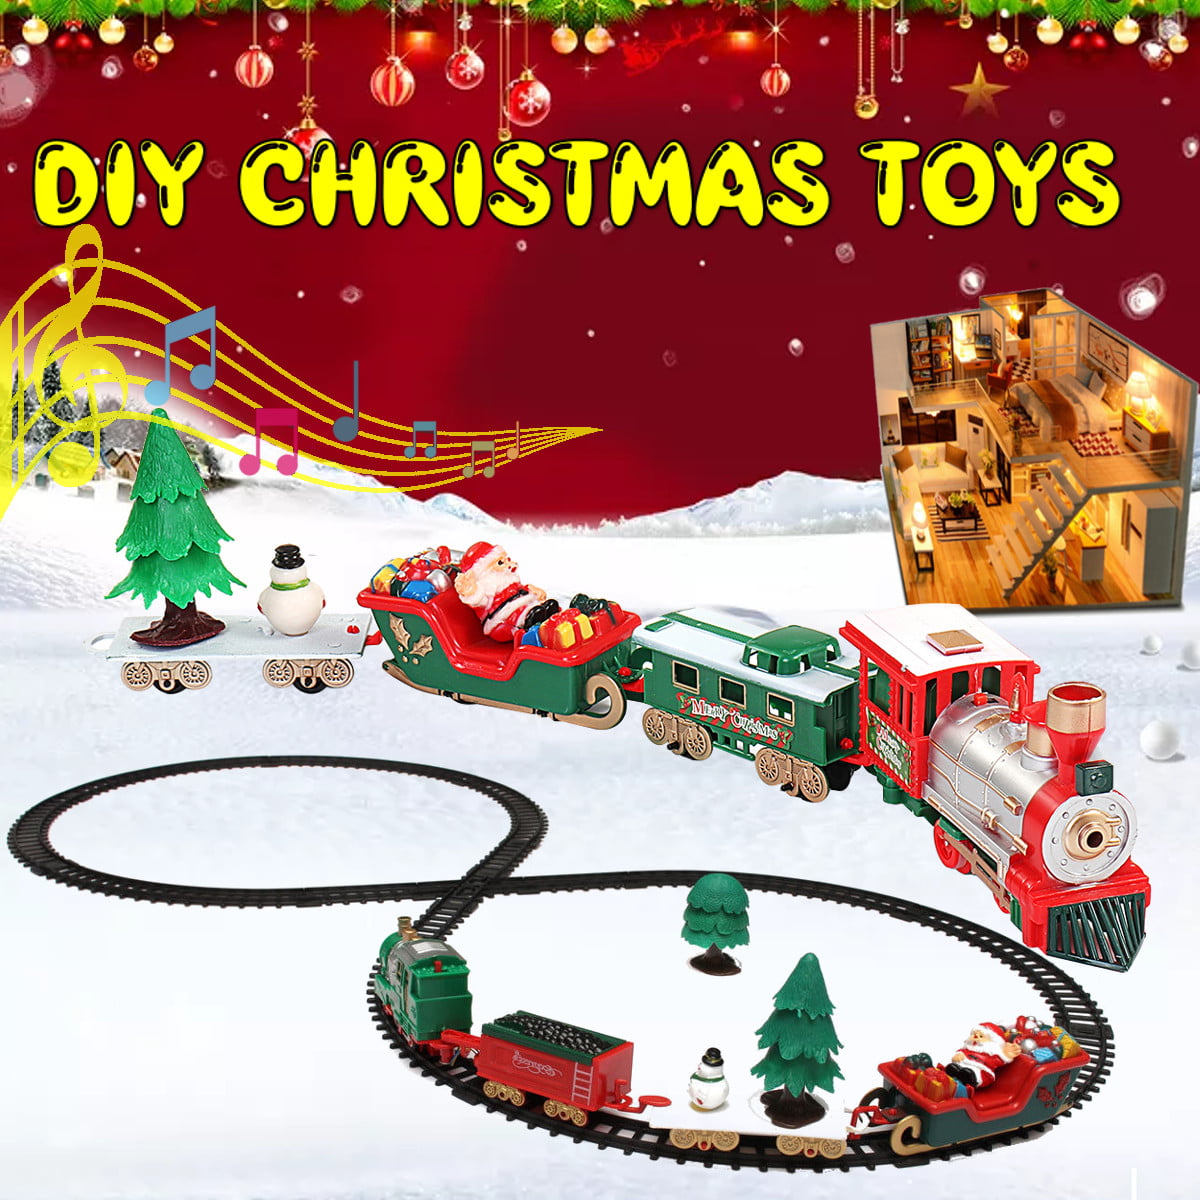 Colcolo 14 PCS Electric Christmas Train Set Toys with Light and Sound for Under Christmas Tree Classic Train Tracks for Kids Boys and Girls 